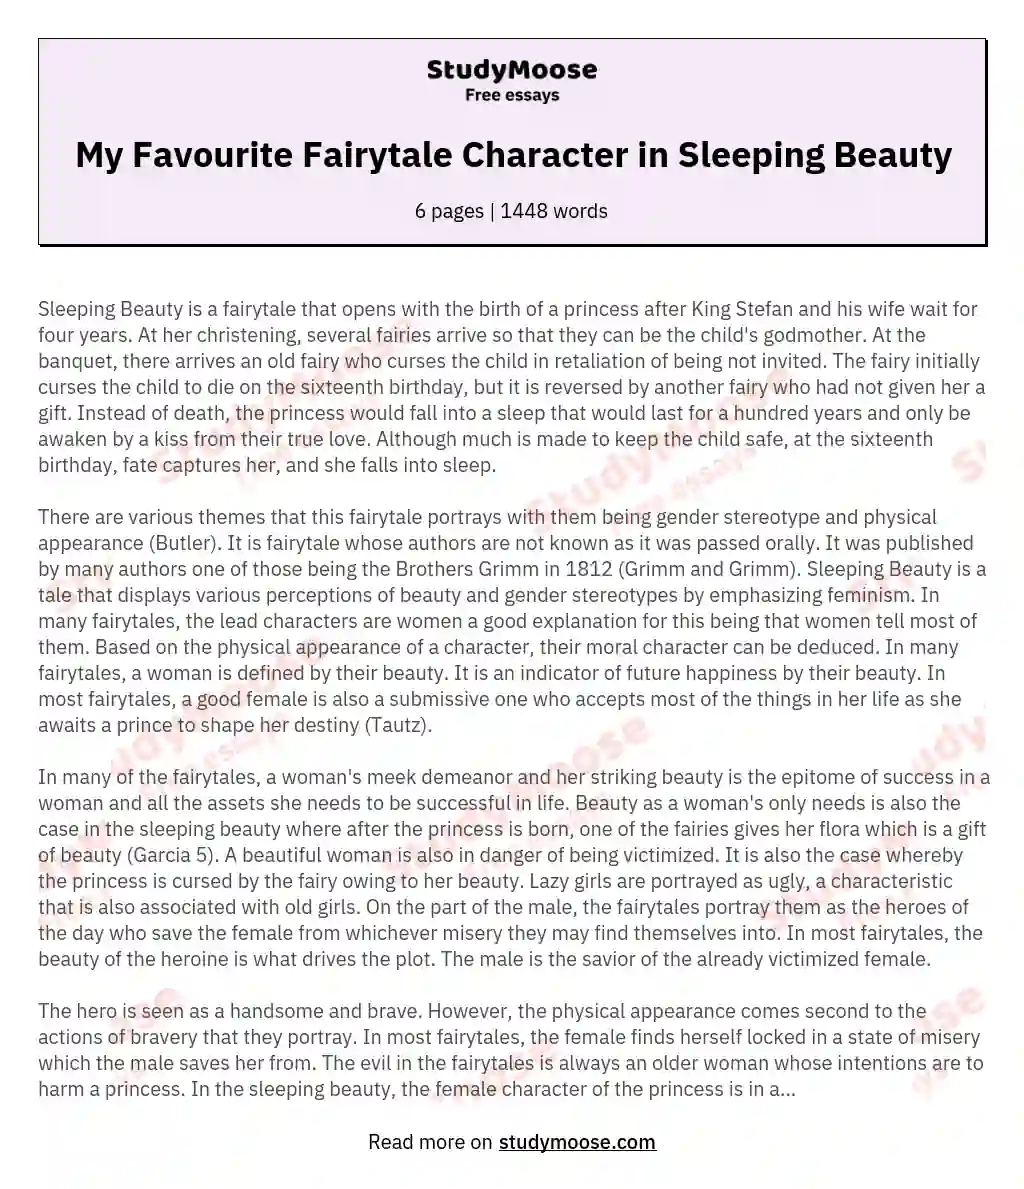 My Favourite Fairytale Character in Sleeping Beauty essay